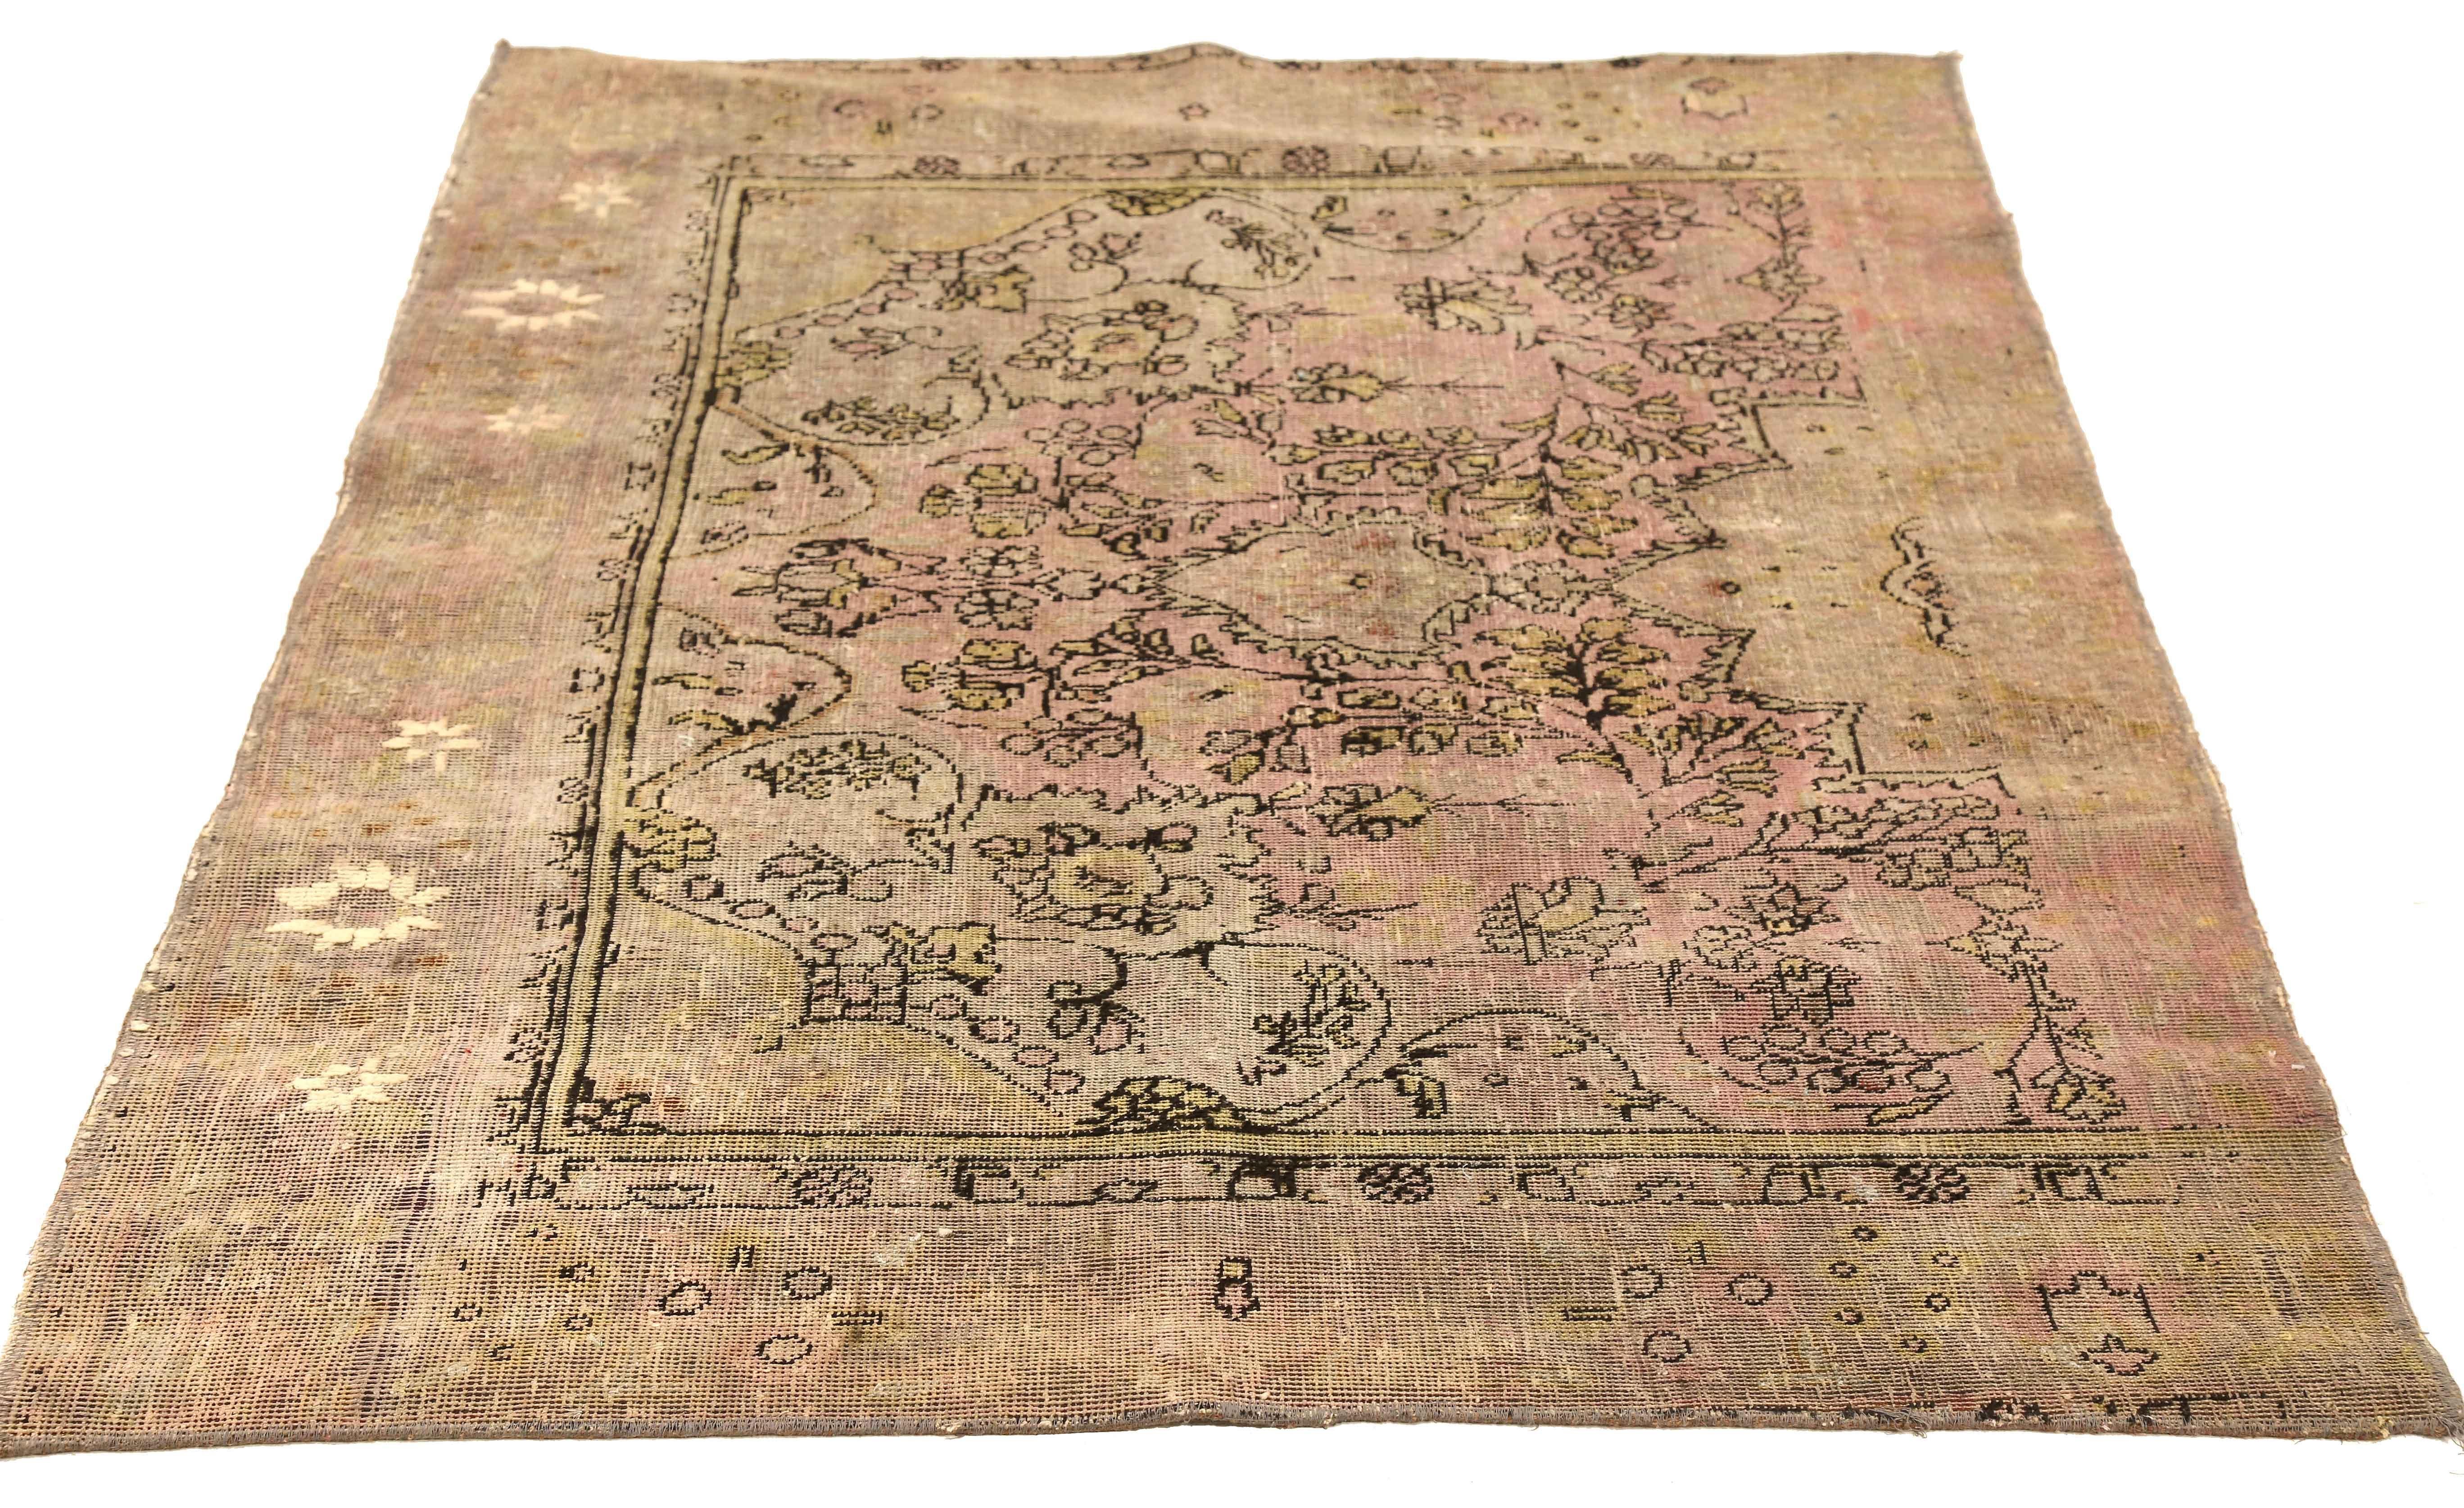 Contemporary handmade Persian area rug from high-quality sheep’s wool and colored with eco-friendly vegetable dyes that are proven safe for humans and pets alike. It’s an overdyed piece with black and pink botanical details. It has a dimension of